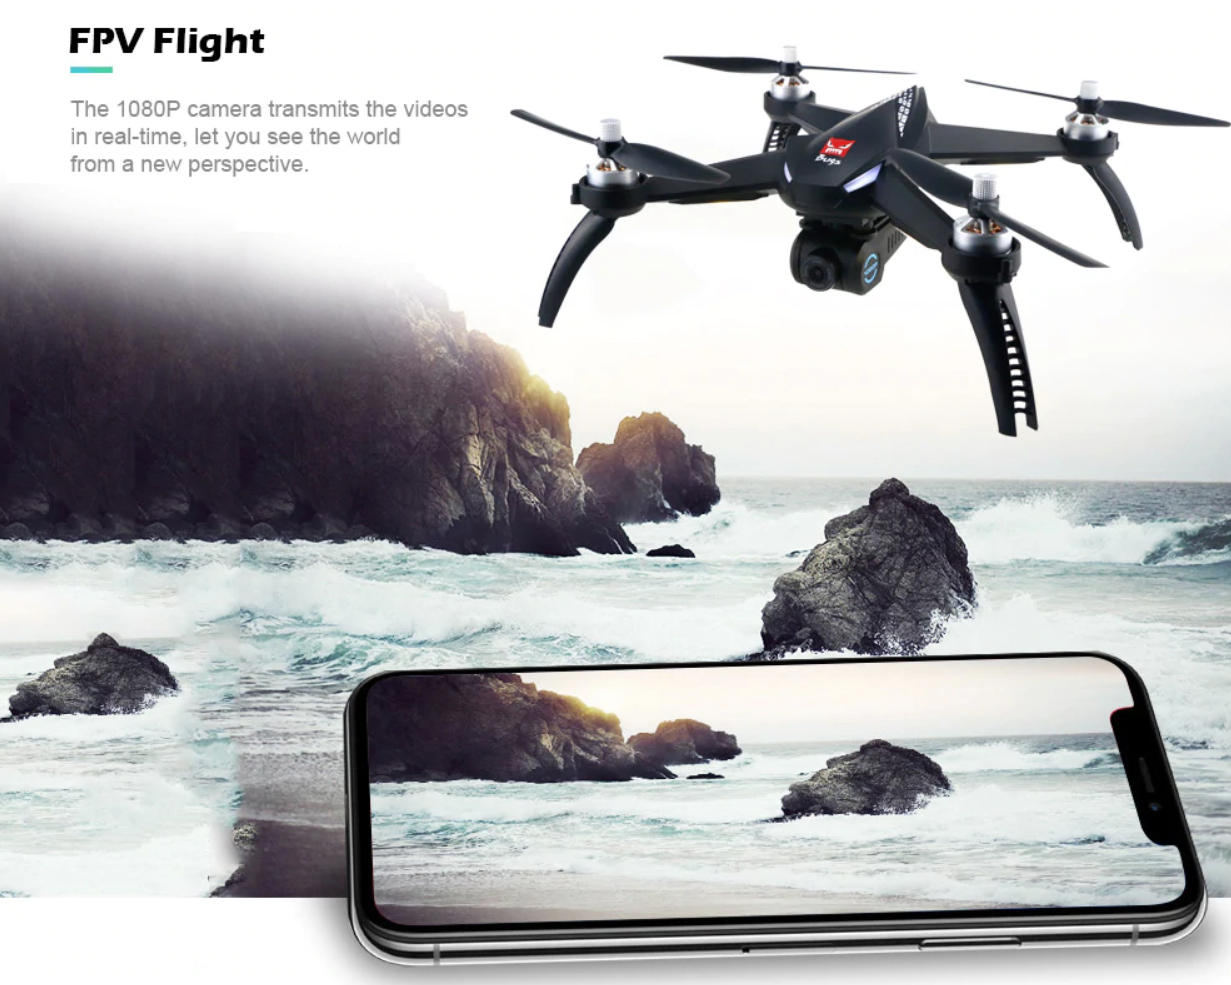 1080p FVP Camera for real time video transmission directly to your smartphone